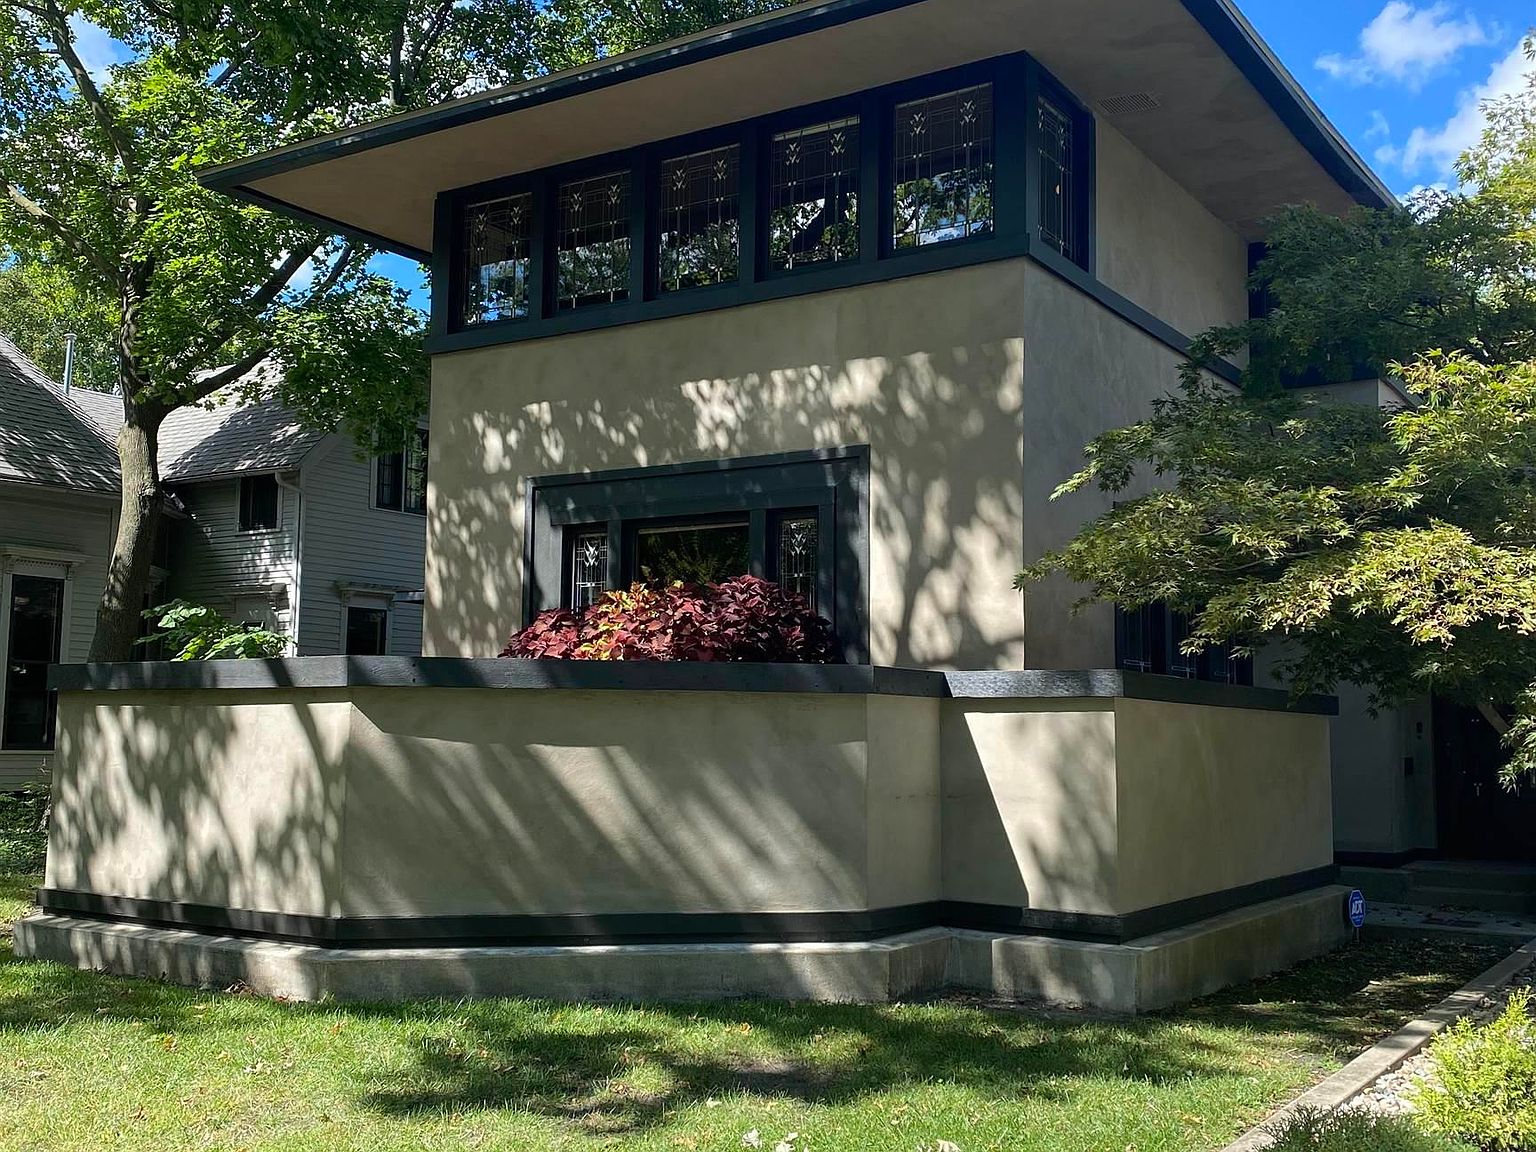 715 W Washington St, South Bend, IN 46601 | Zillow